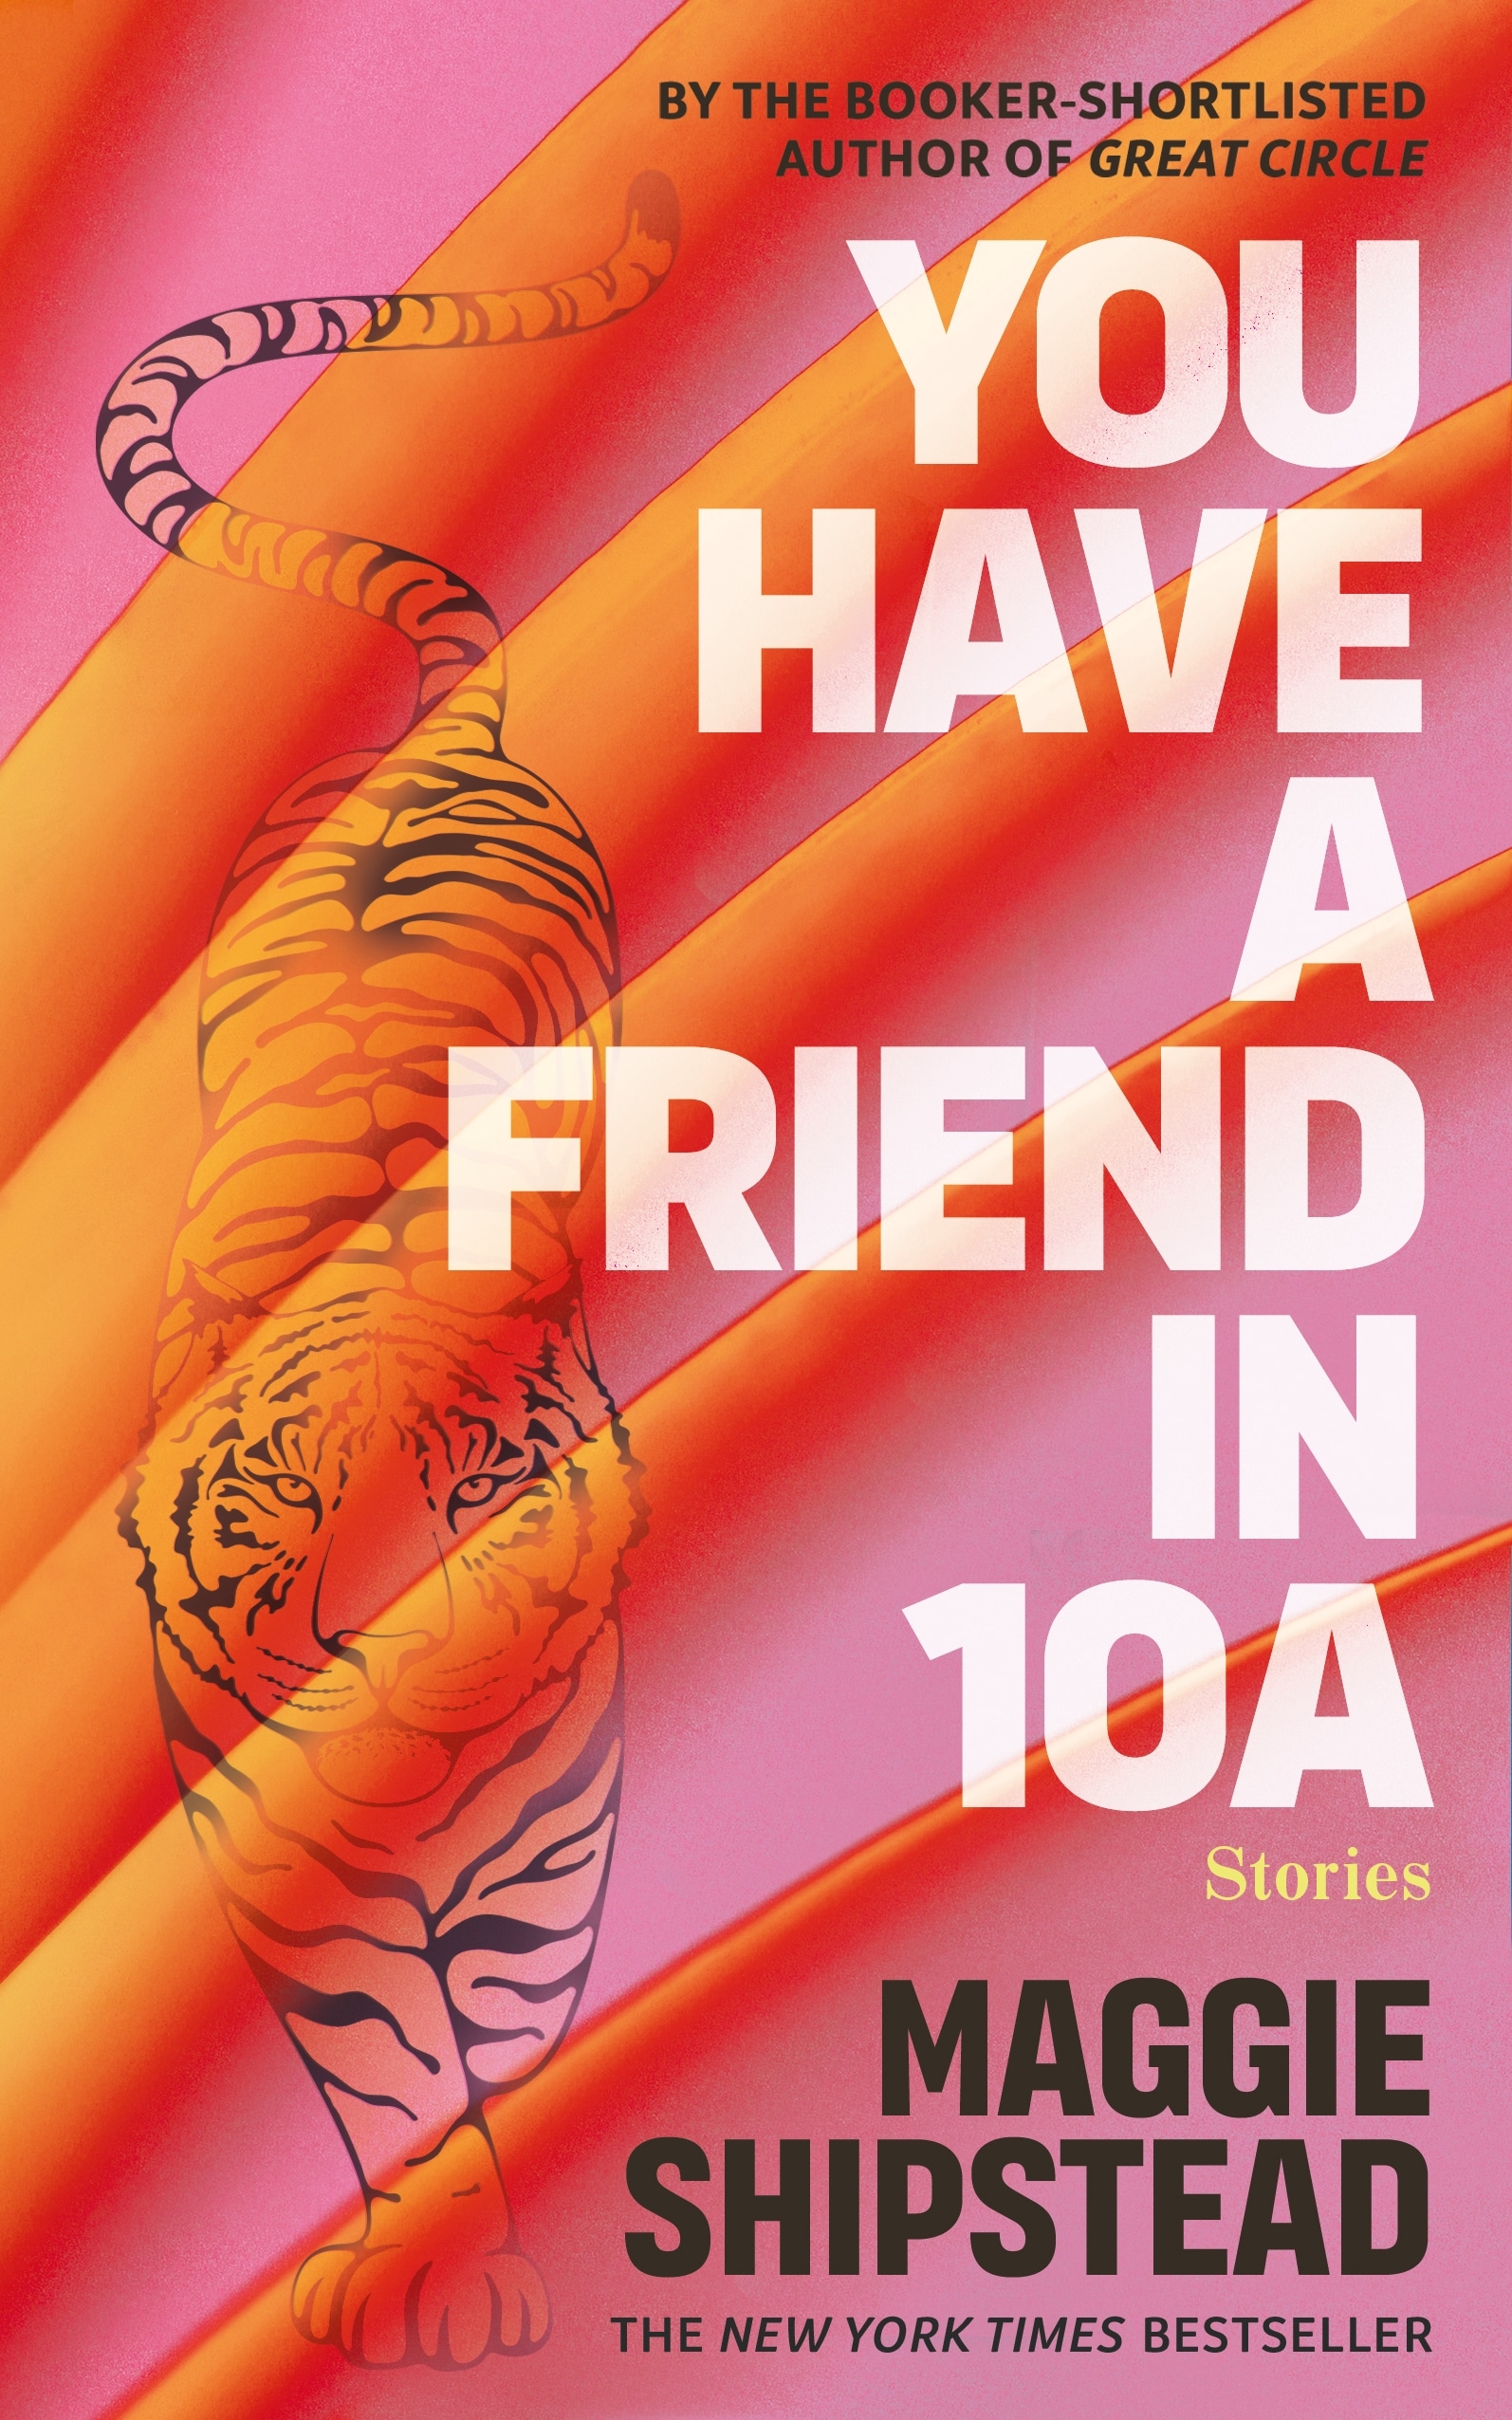 Book “You have a friend in 10A” by Maggie Shipstead — May 19, 2022